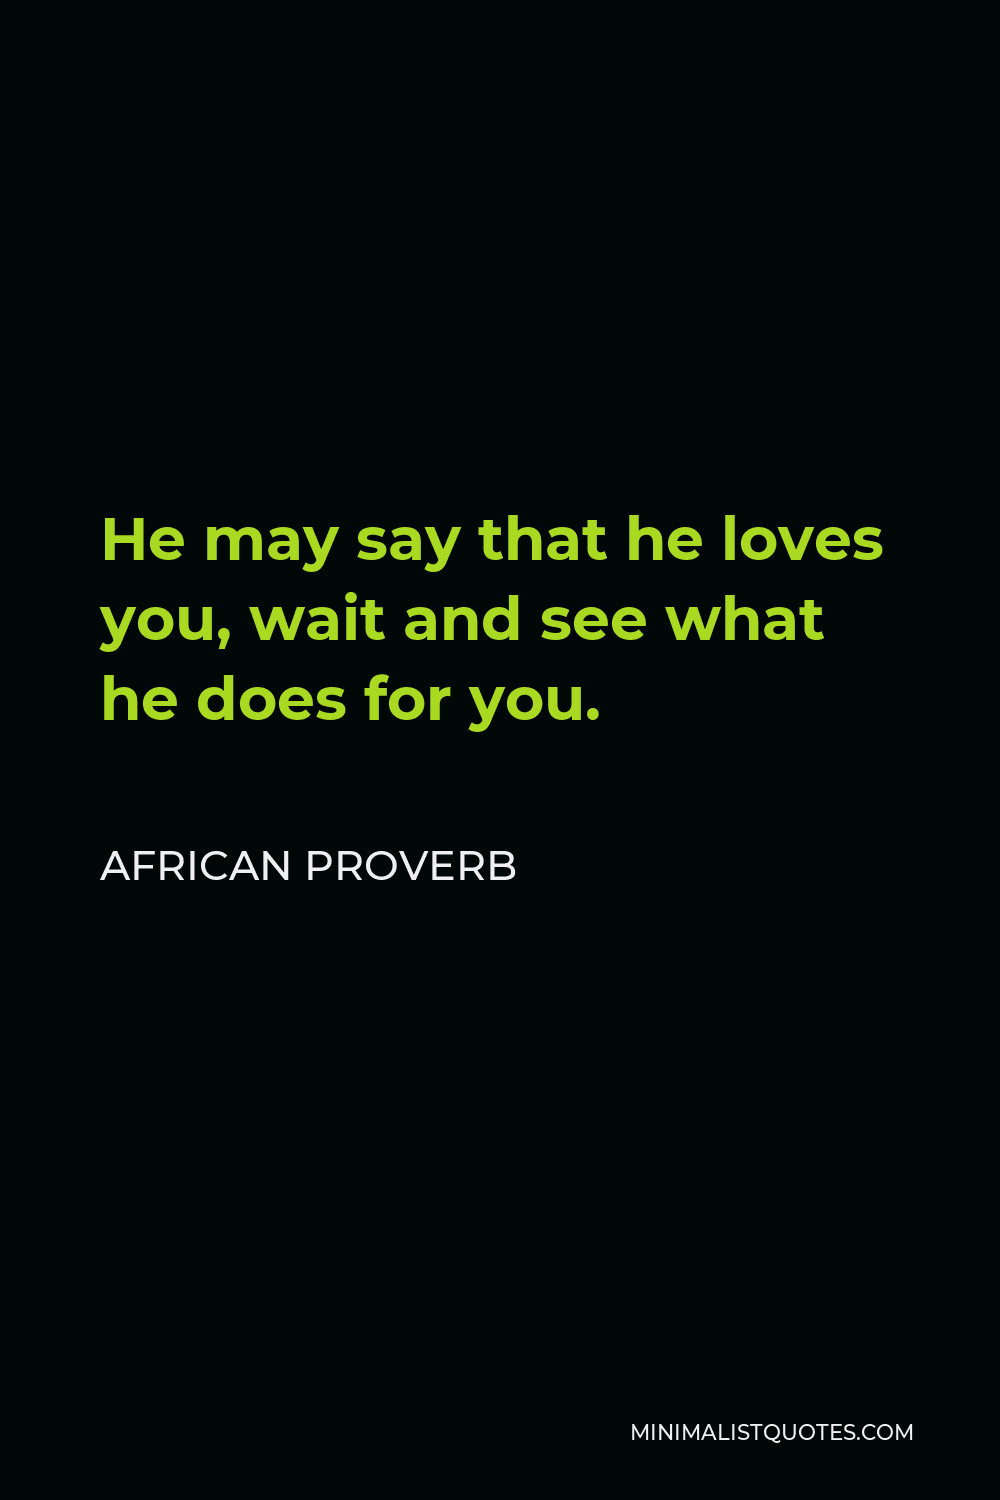 African Proverb Quote - He may say that he loves you, wait and see what he does for you.